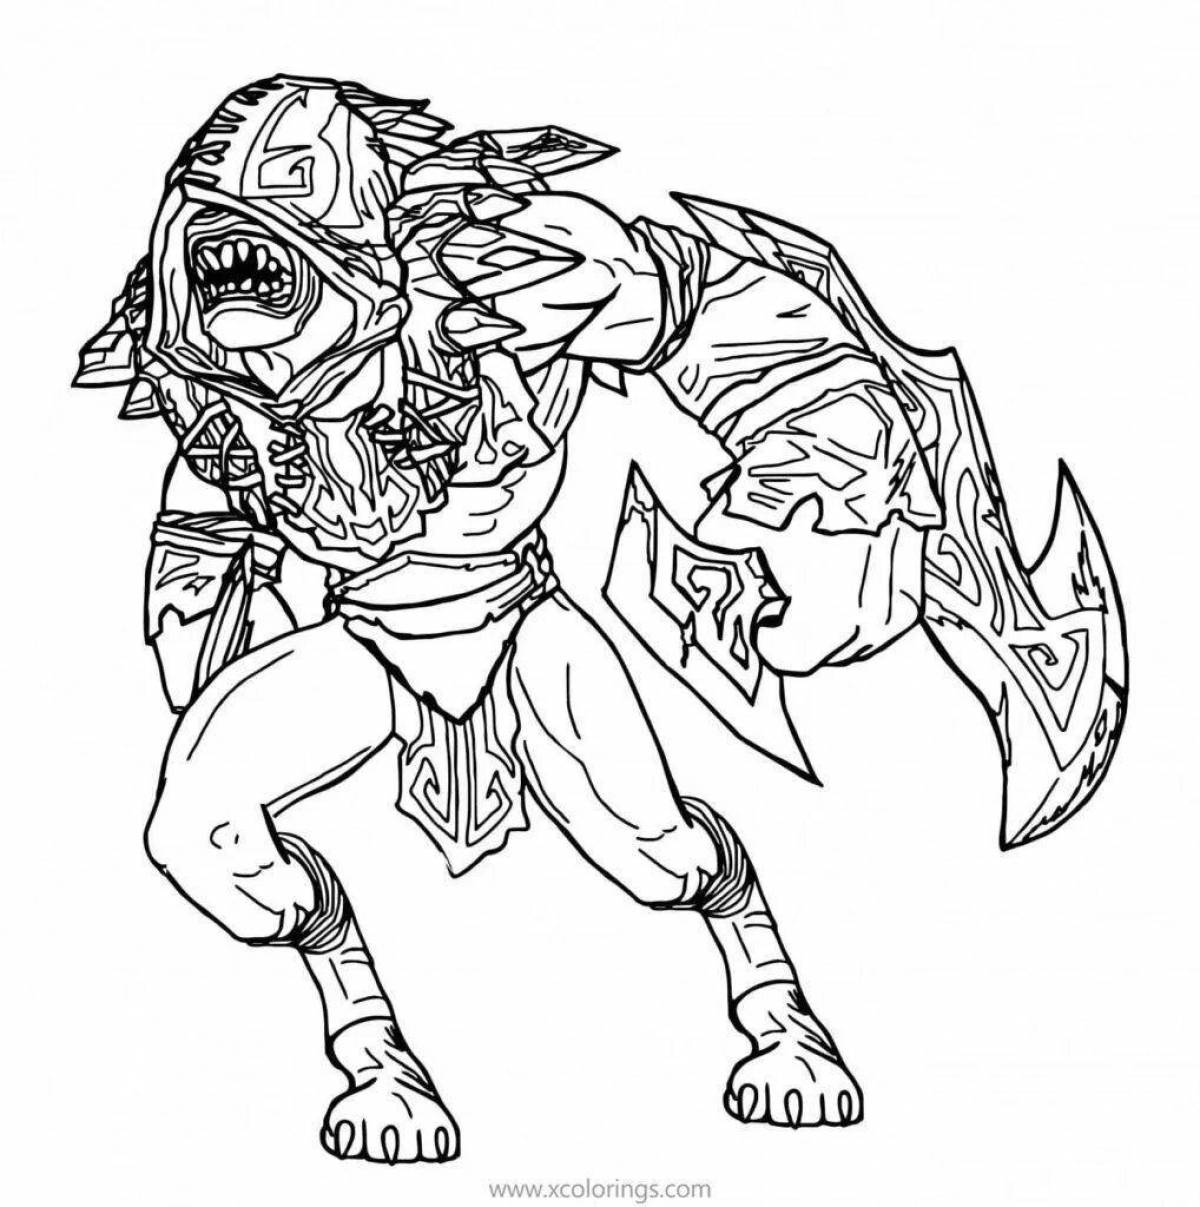 Pudge live coloring page